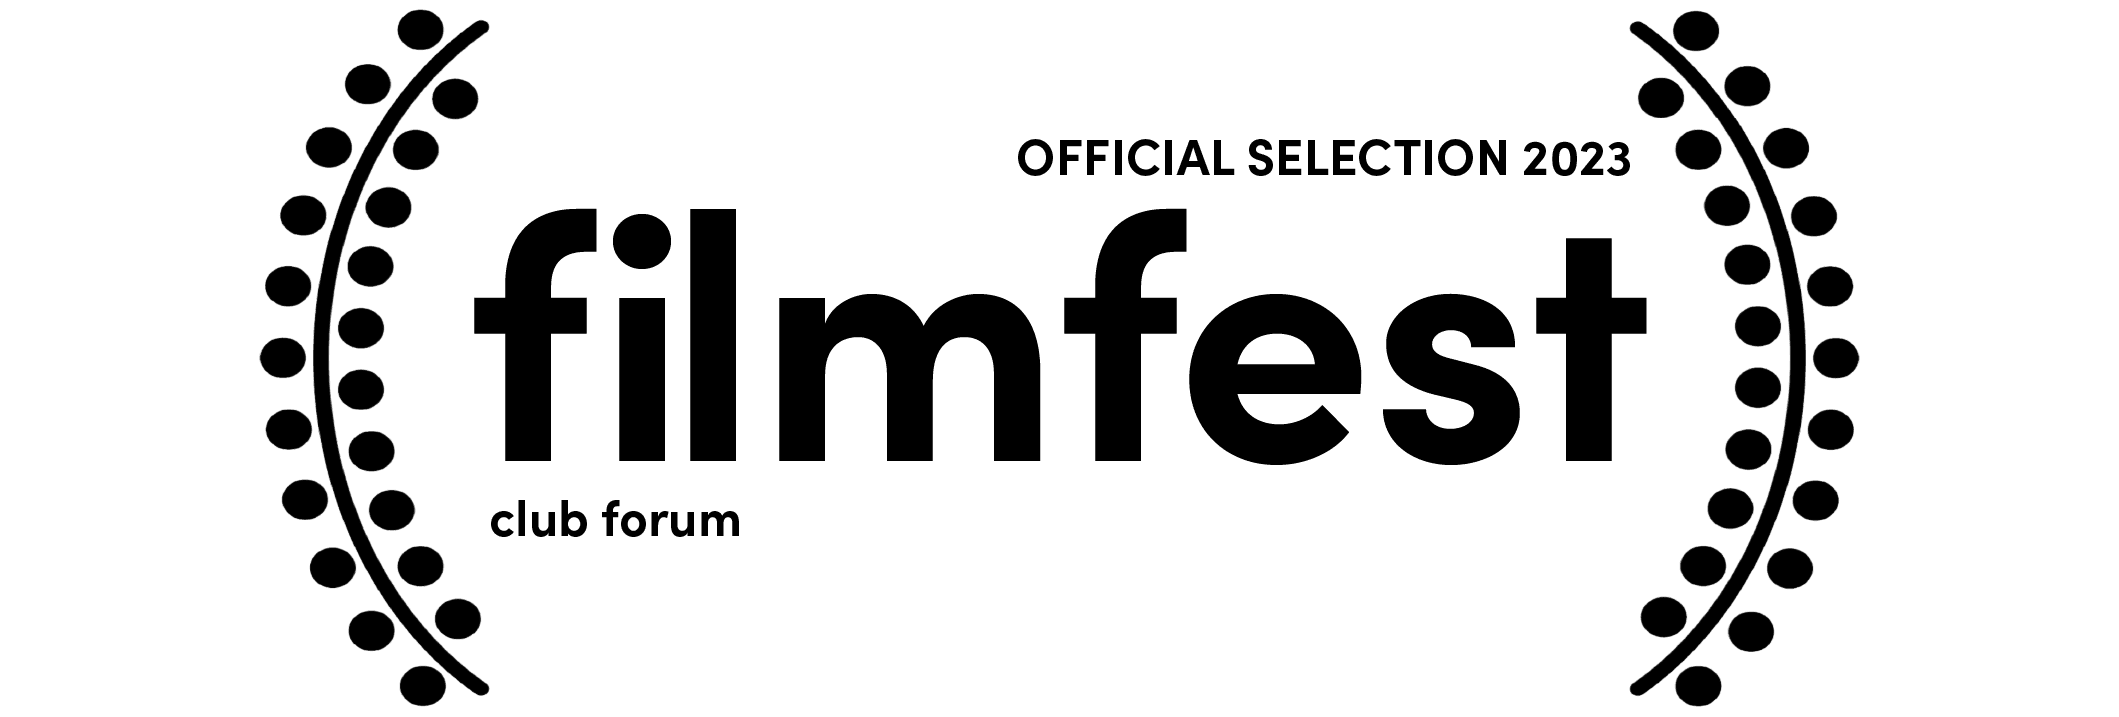 Official Selection 2023 - Filmfest Club Forum